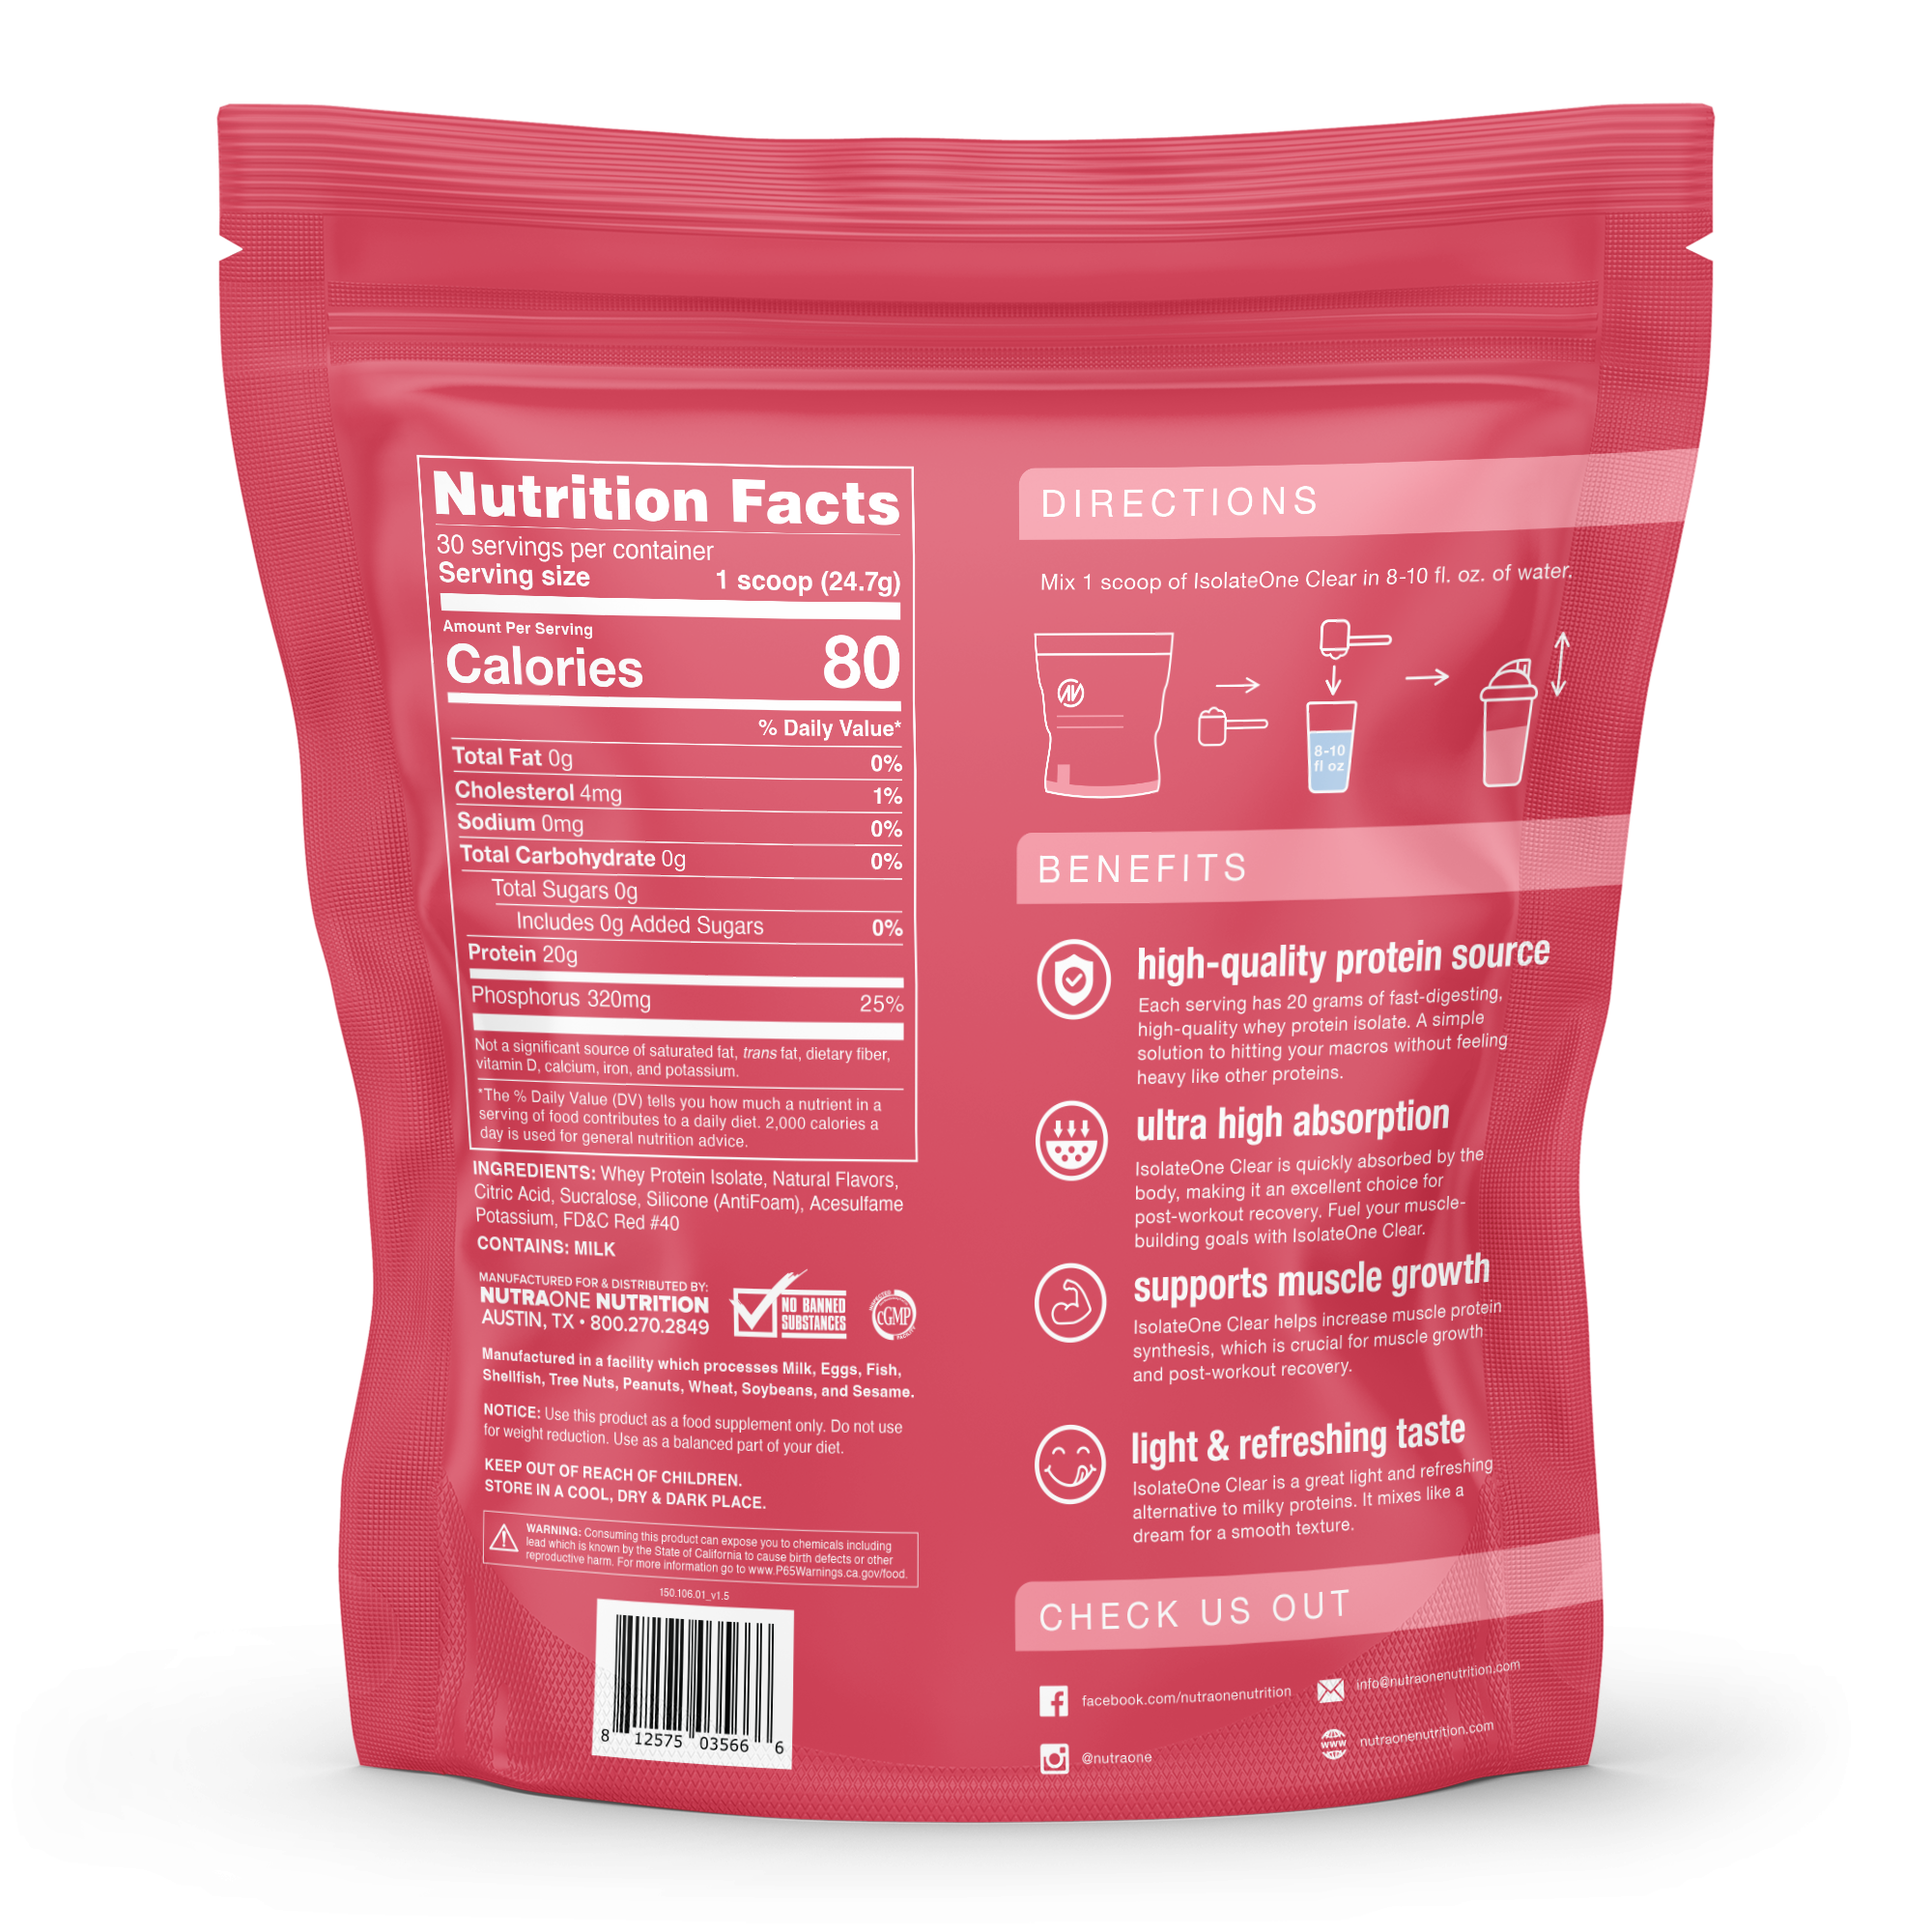 IsolateOne Clear Protein by NutraOne